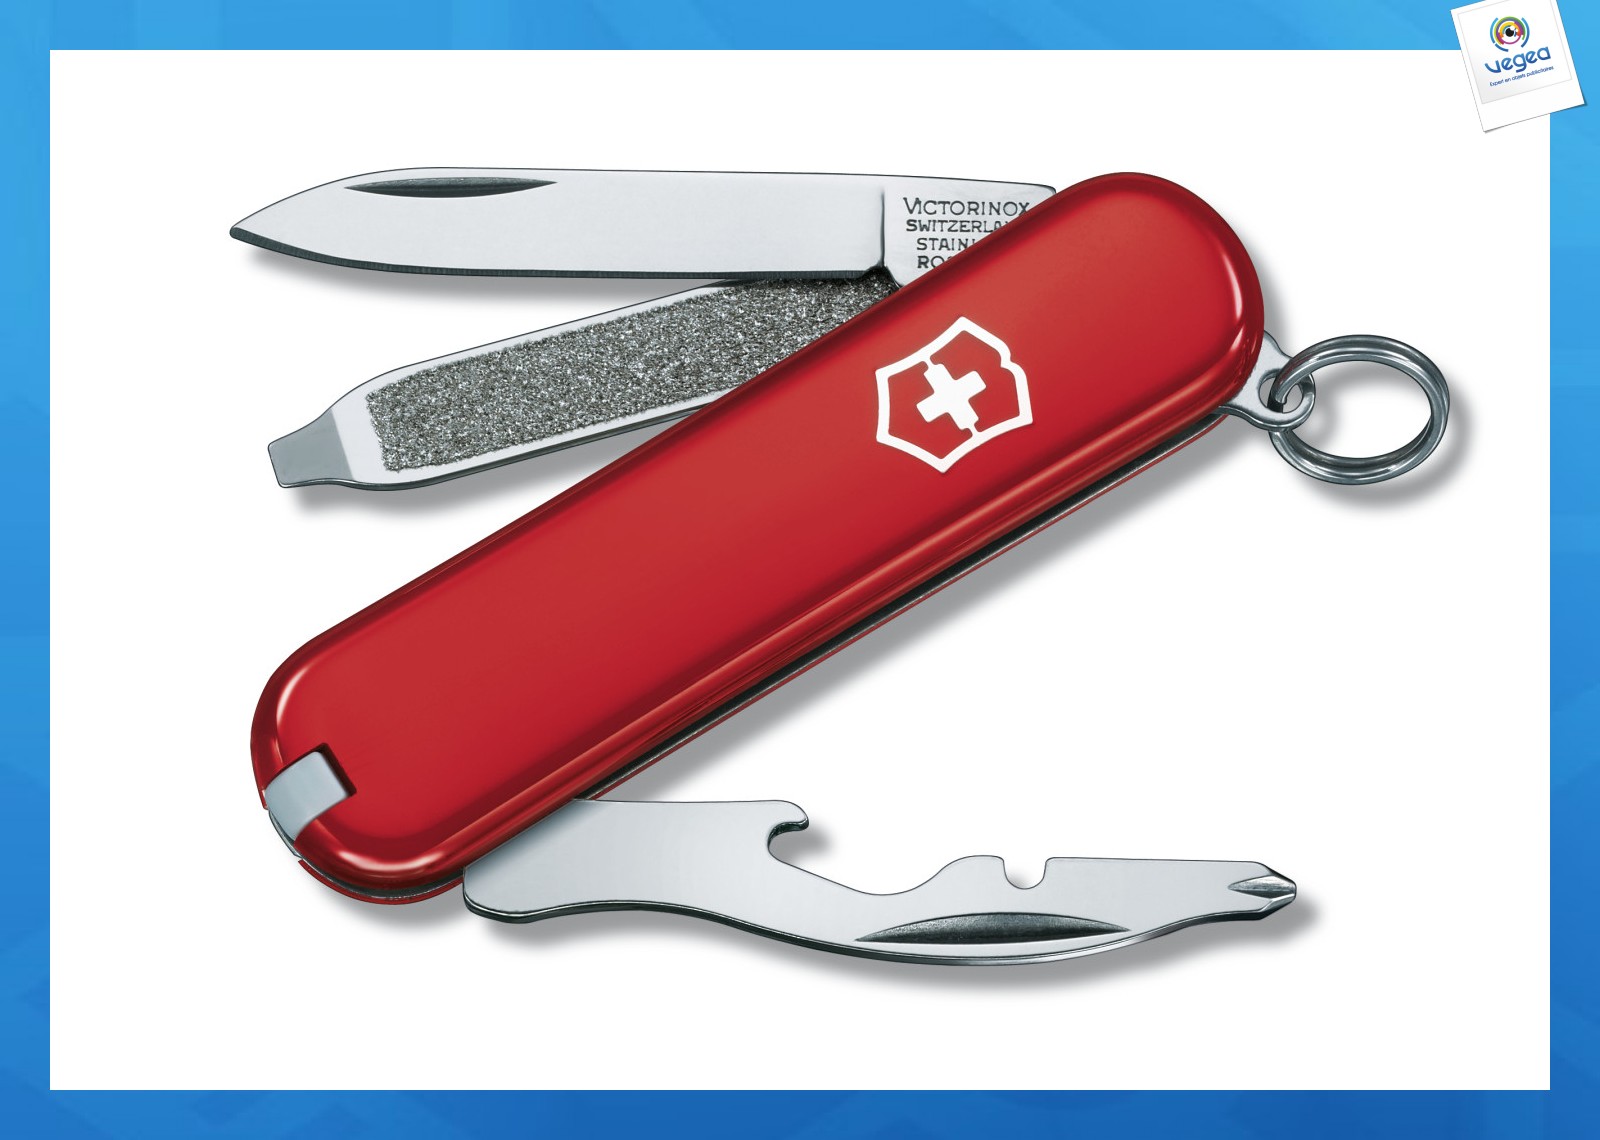 Petit couteau suisse victorinox personnalisable rally